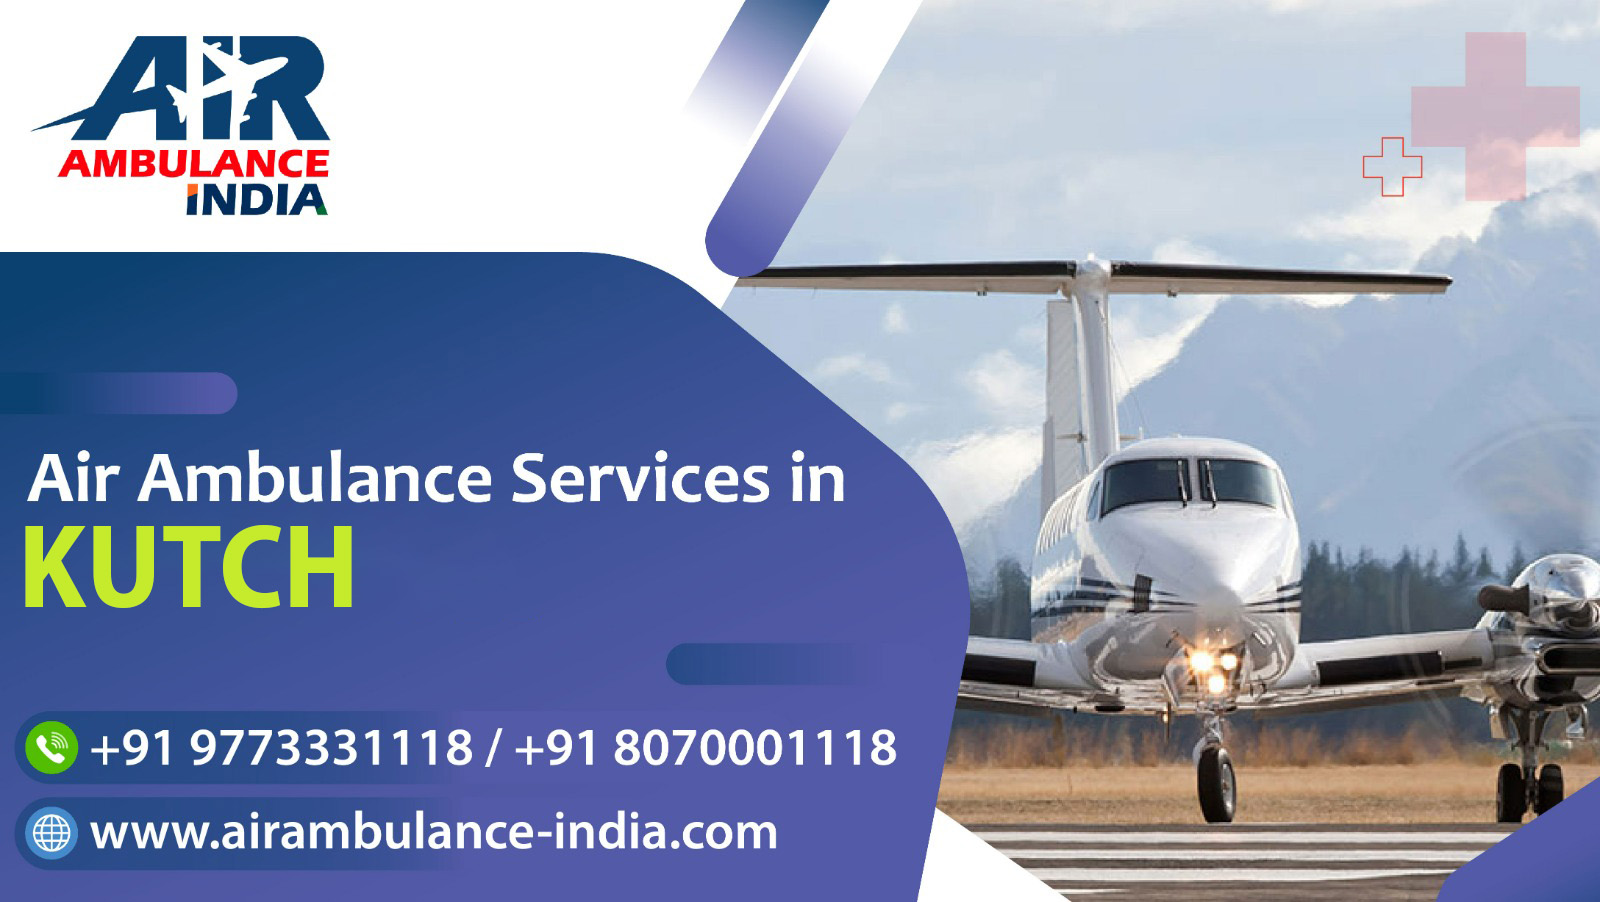 Air Ambulance Services in Kutch